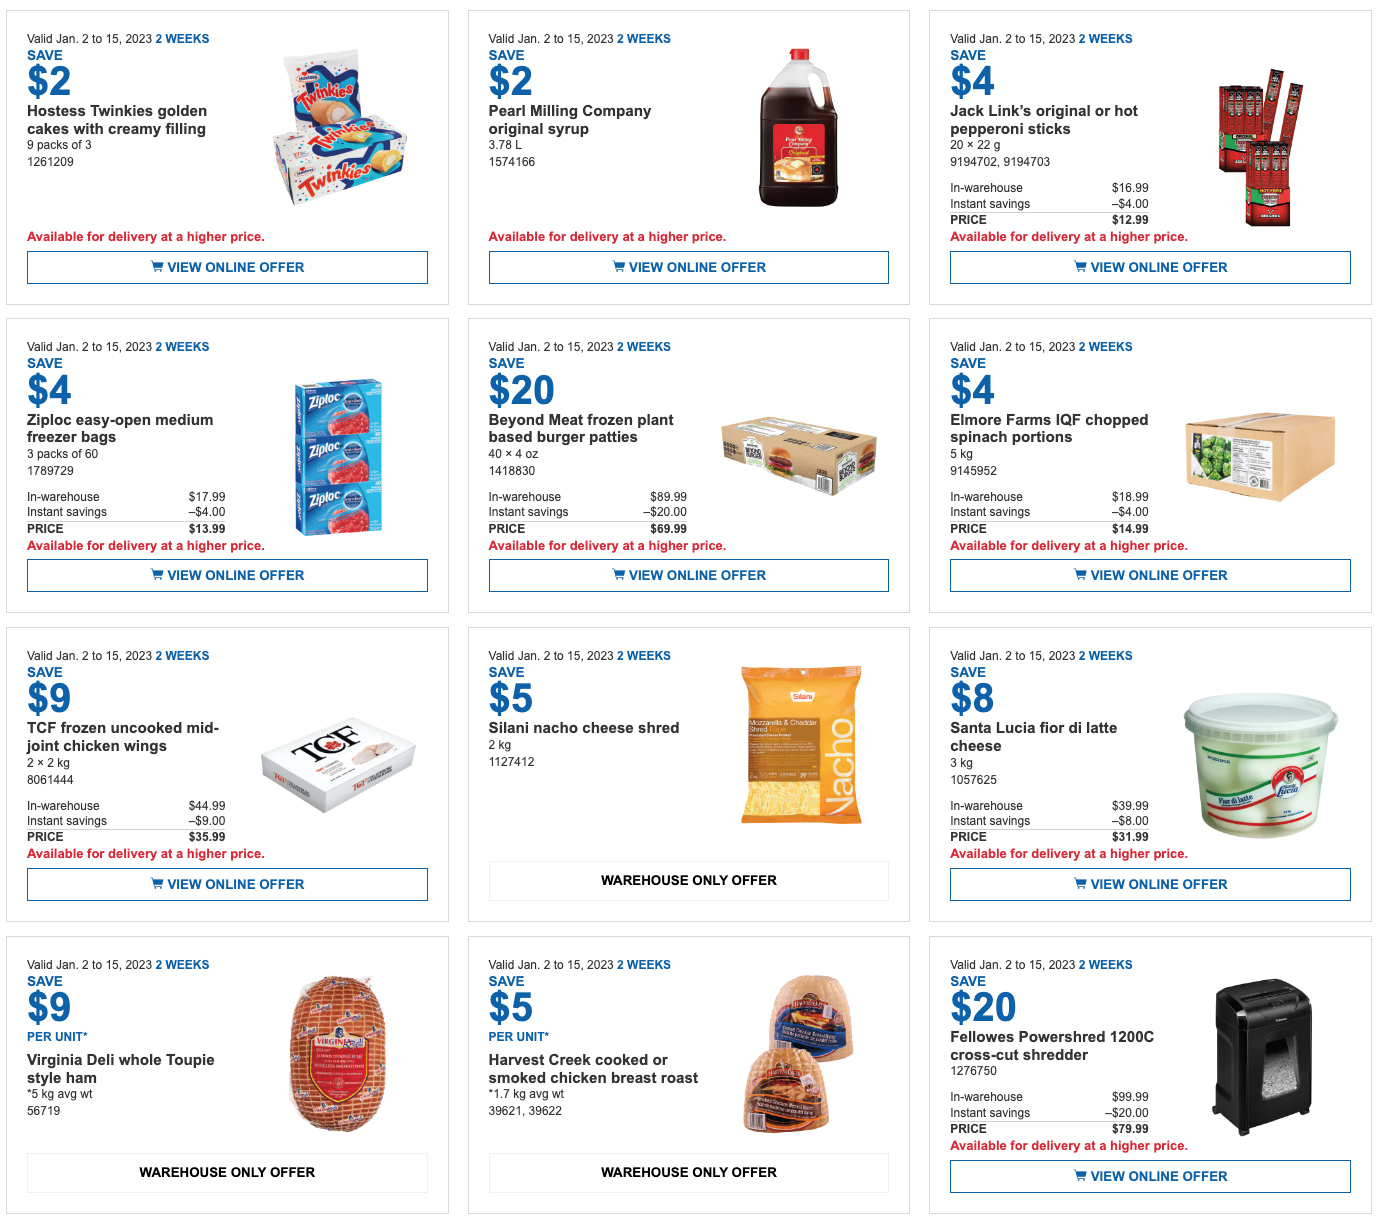 costco-canada-business-centre-instant-savings-coupons-flyer-until